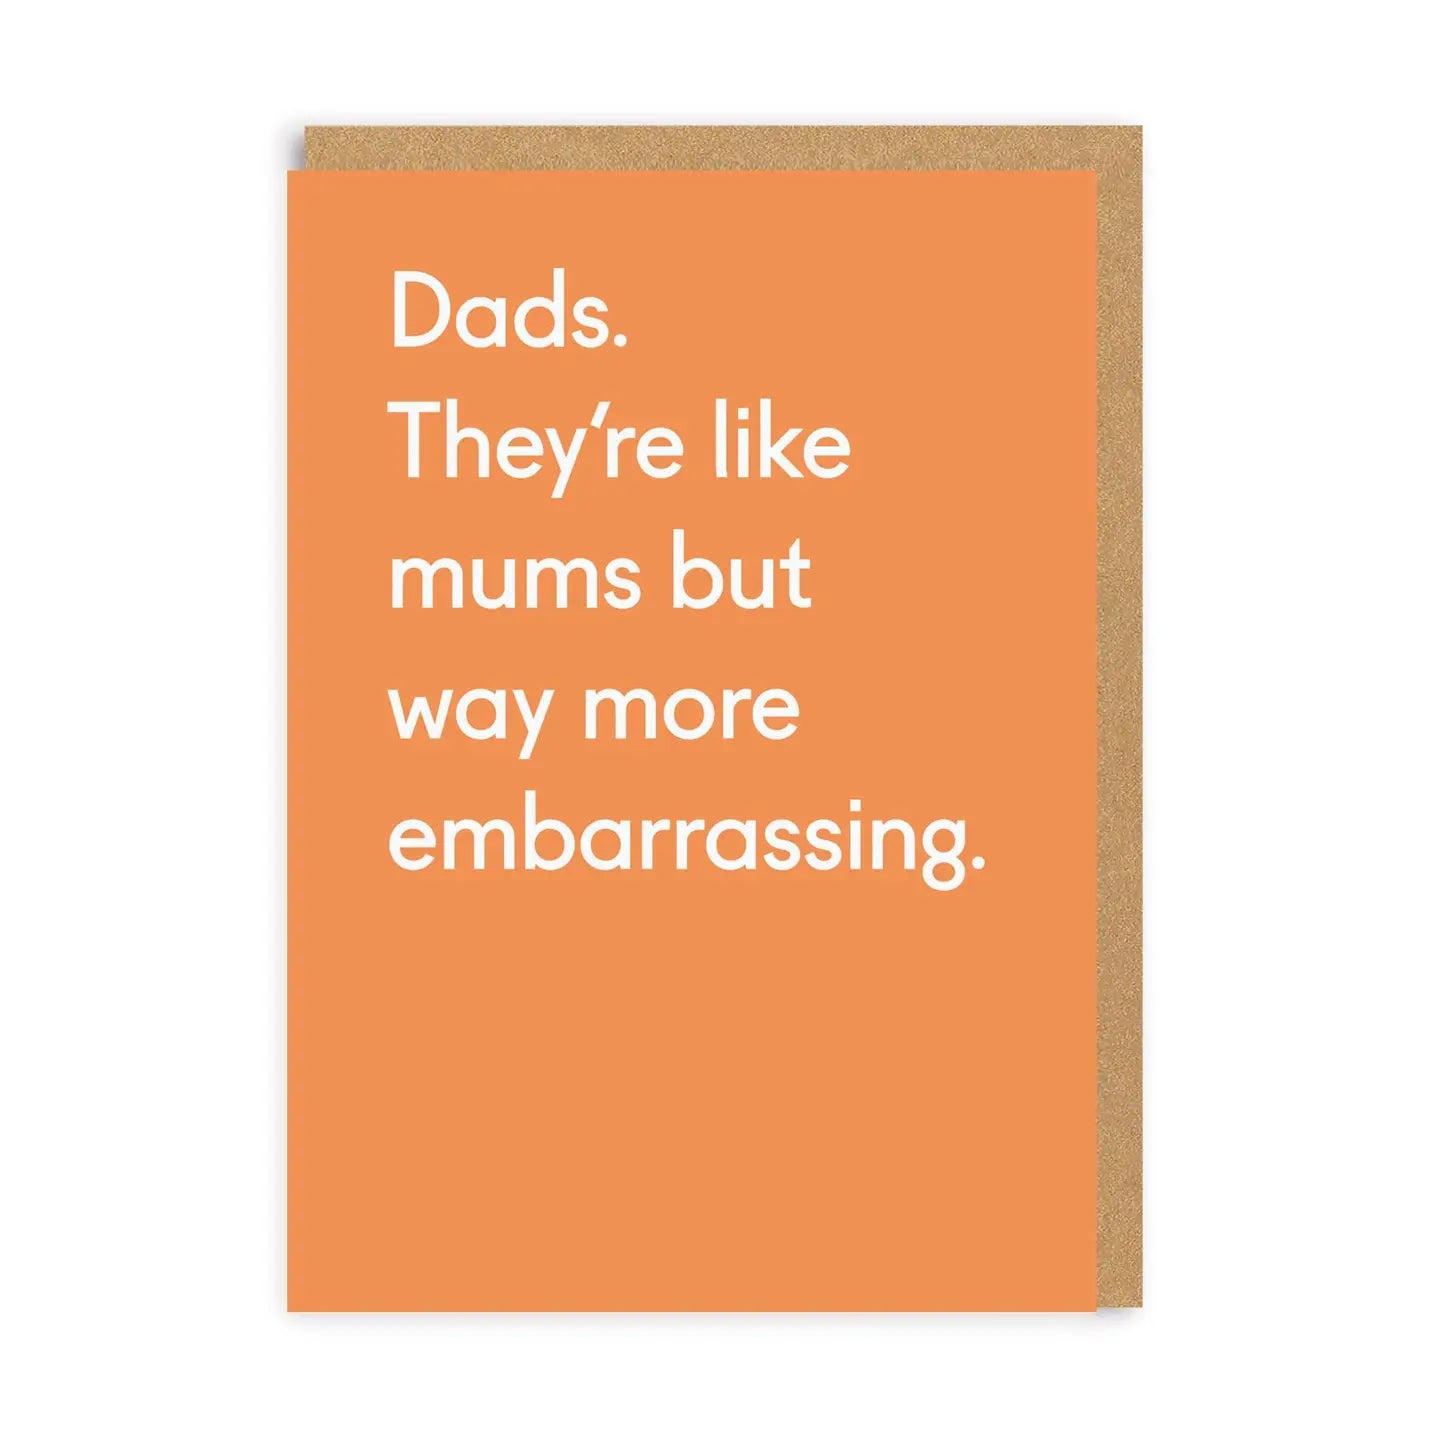 Embarrassing Dads card